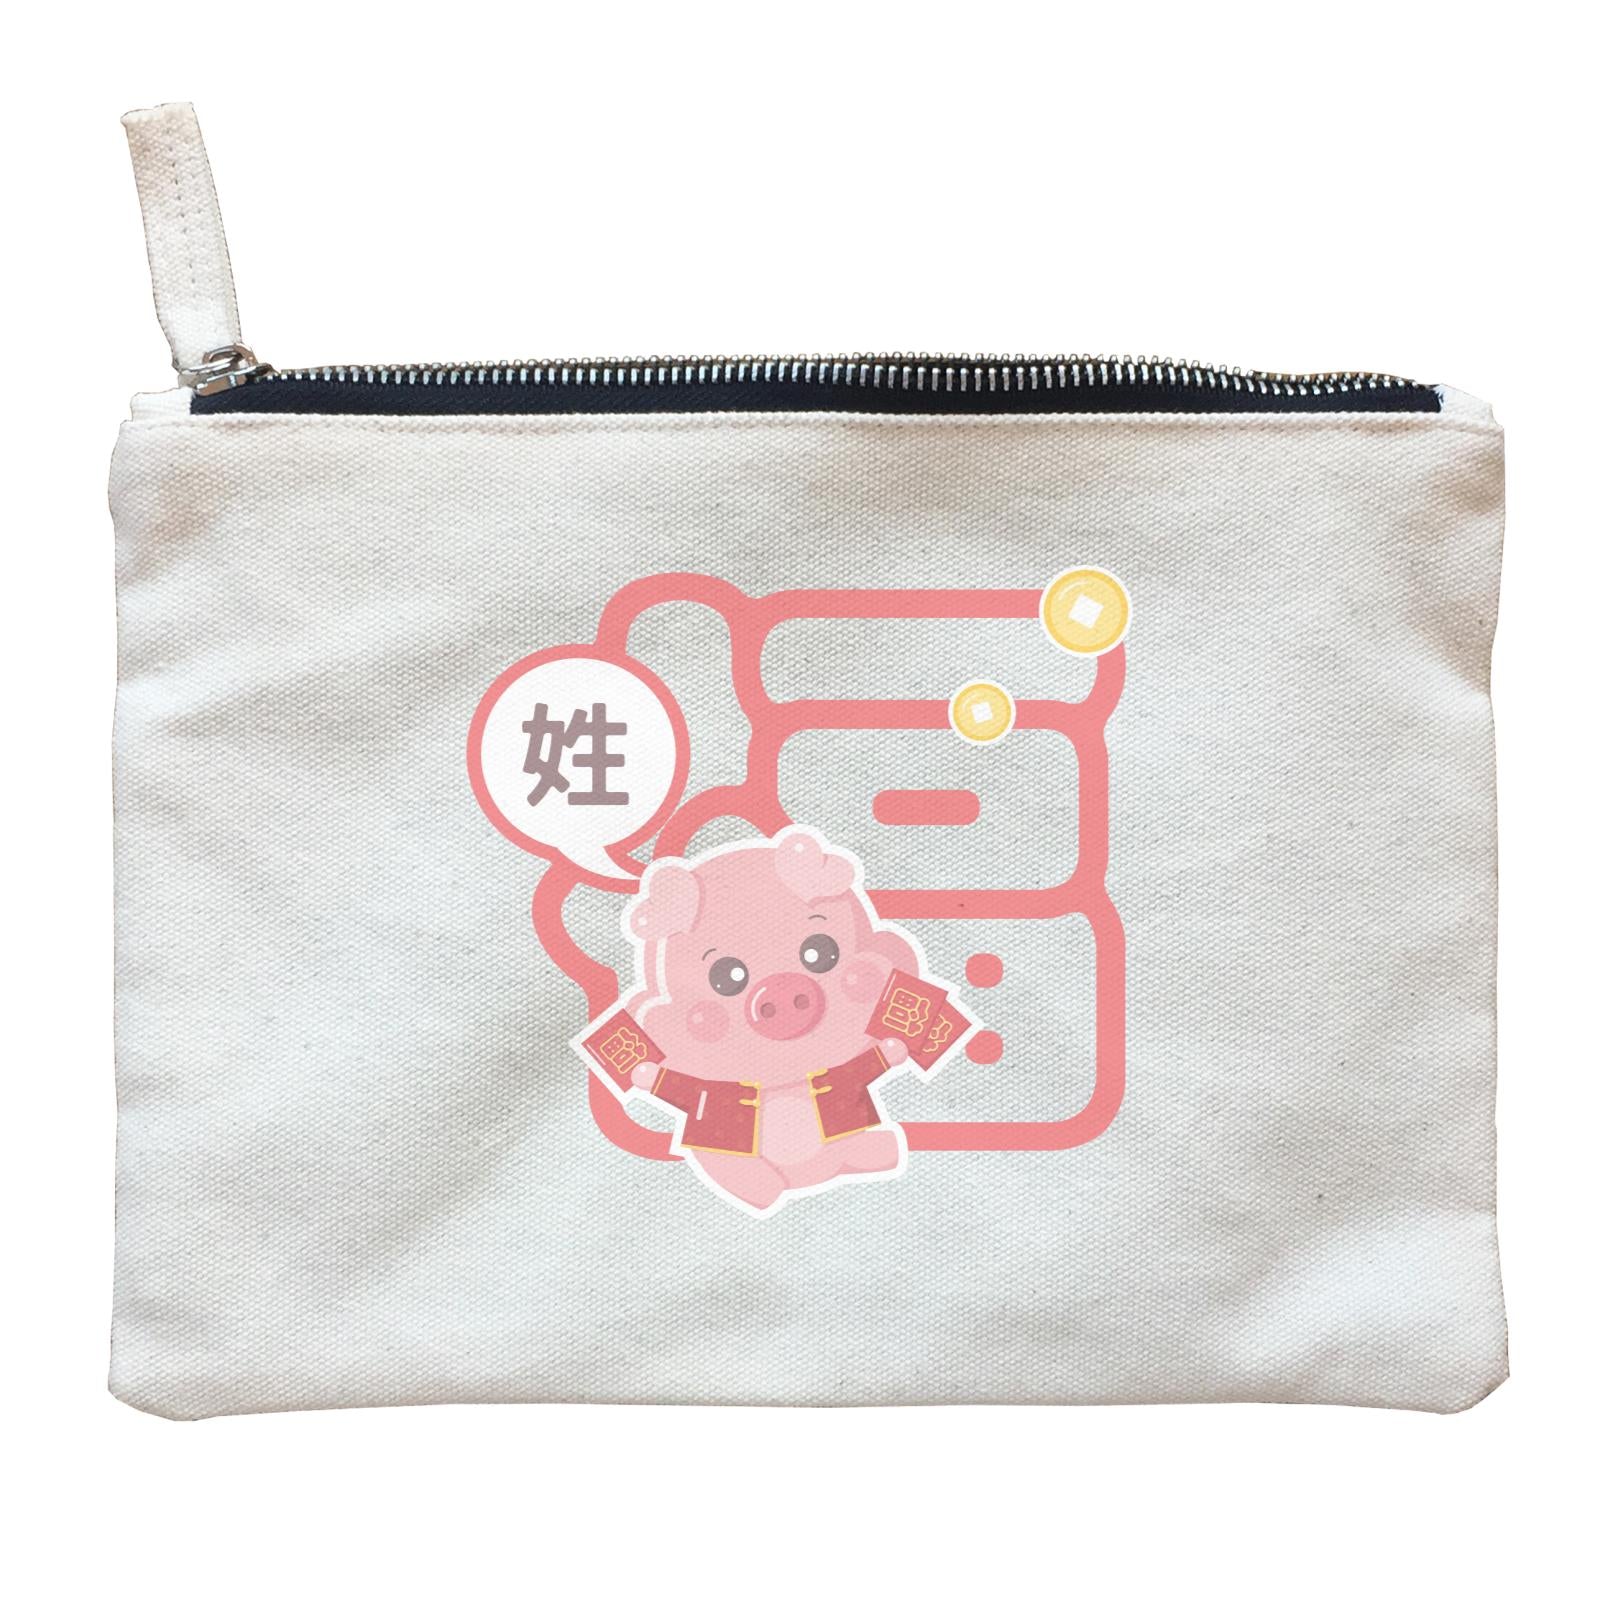 Chinese New Year Cute Pig Good Fortune Boy Accessories With Addname Zipper Pouch